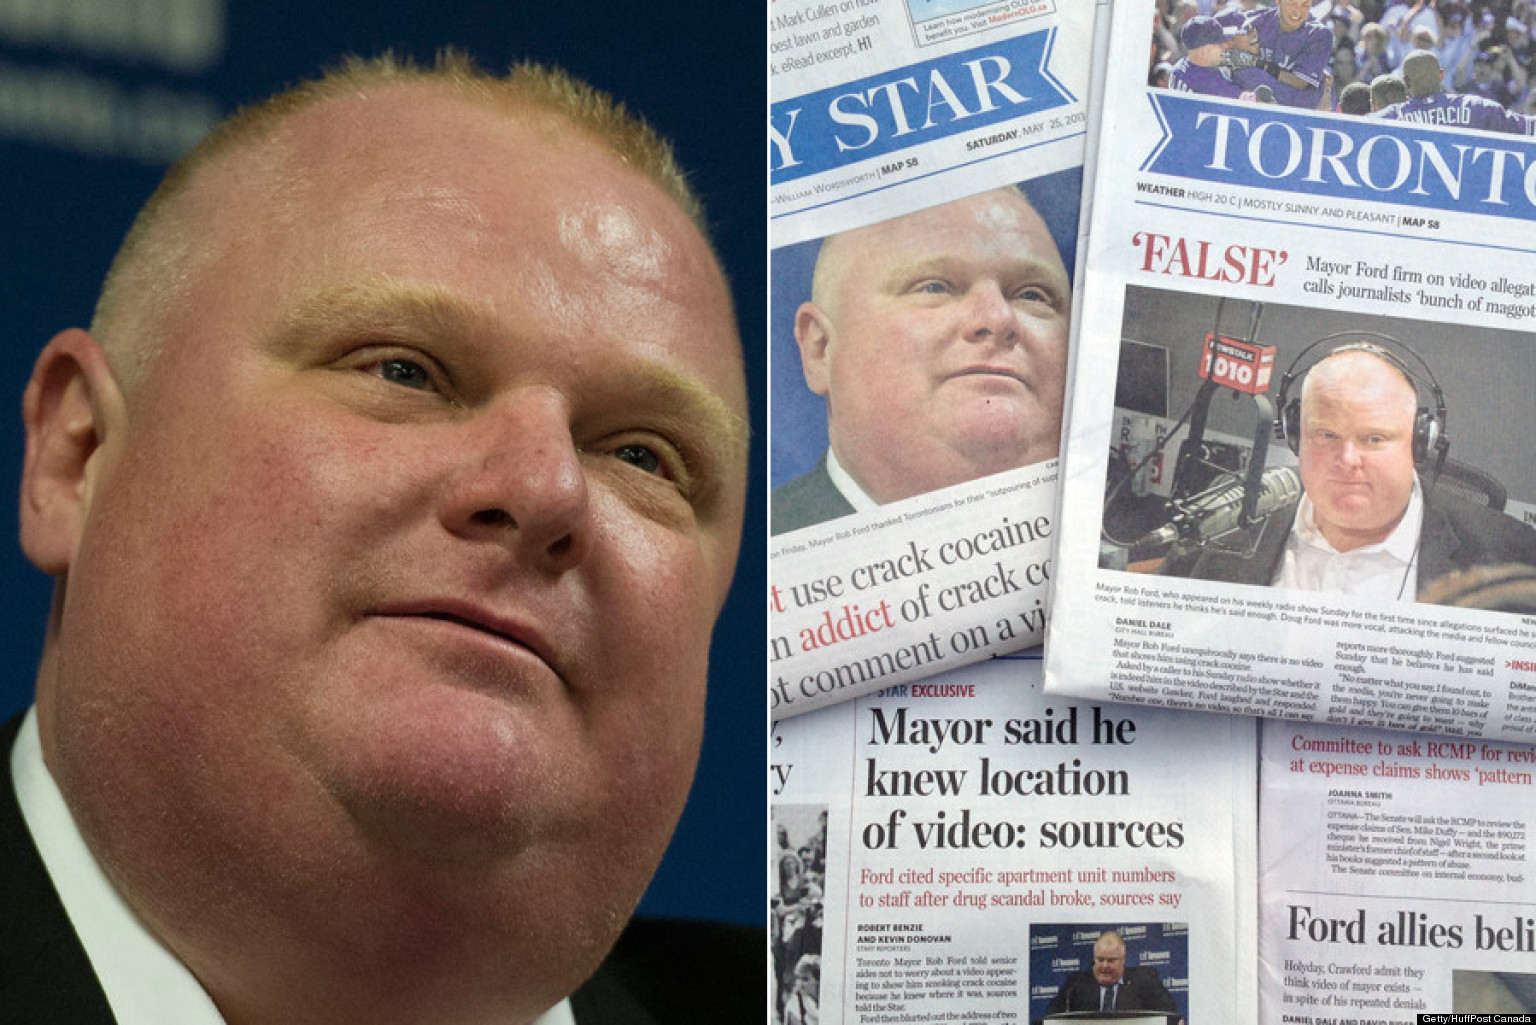 Rob ford and the toronto star #3